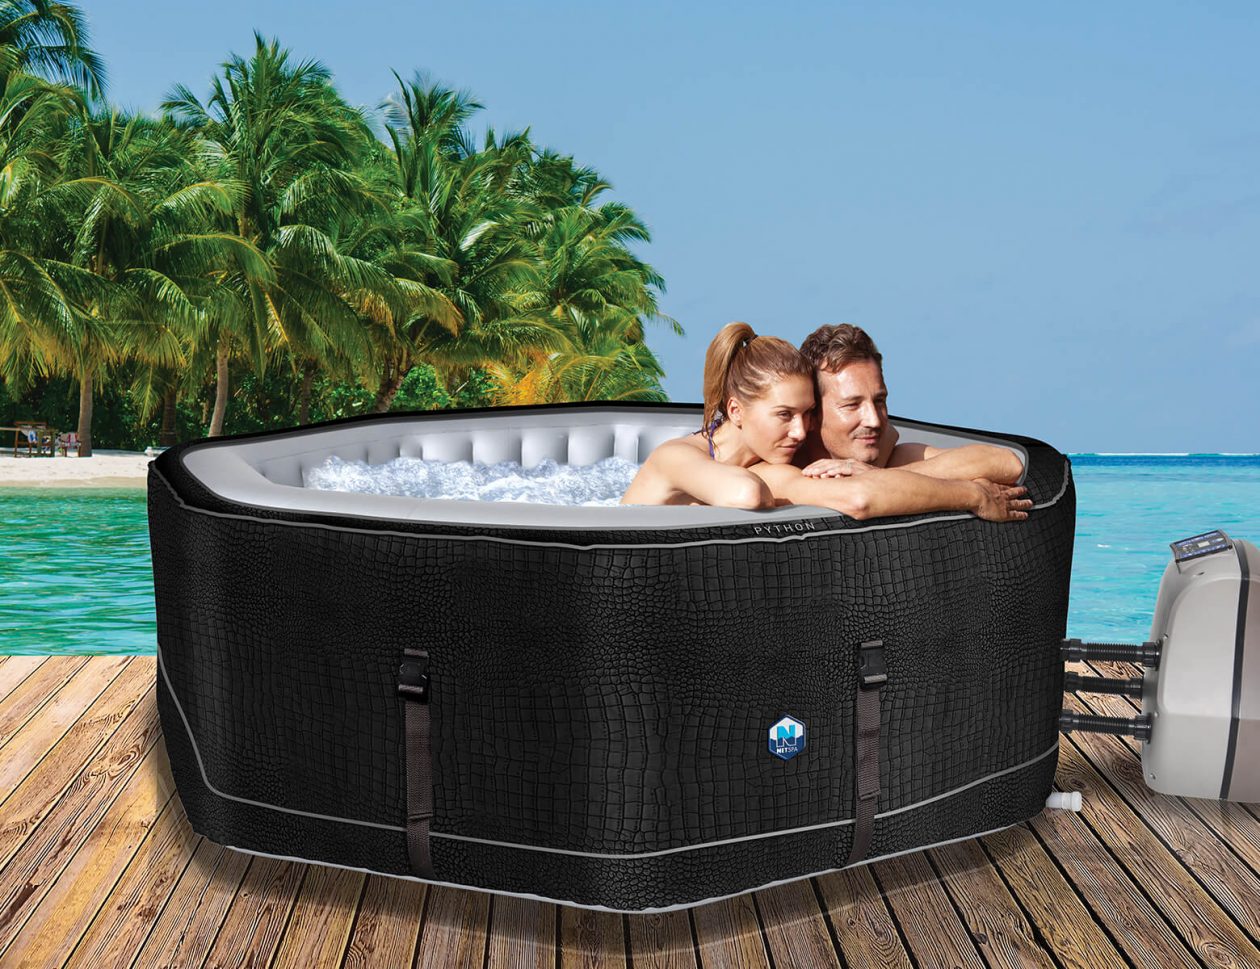 Spa Gonglable Jacuzzi gonflable pour terrasse